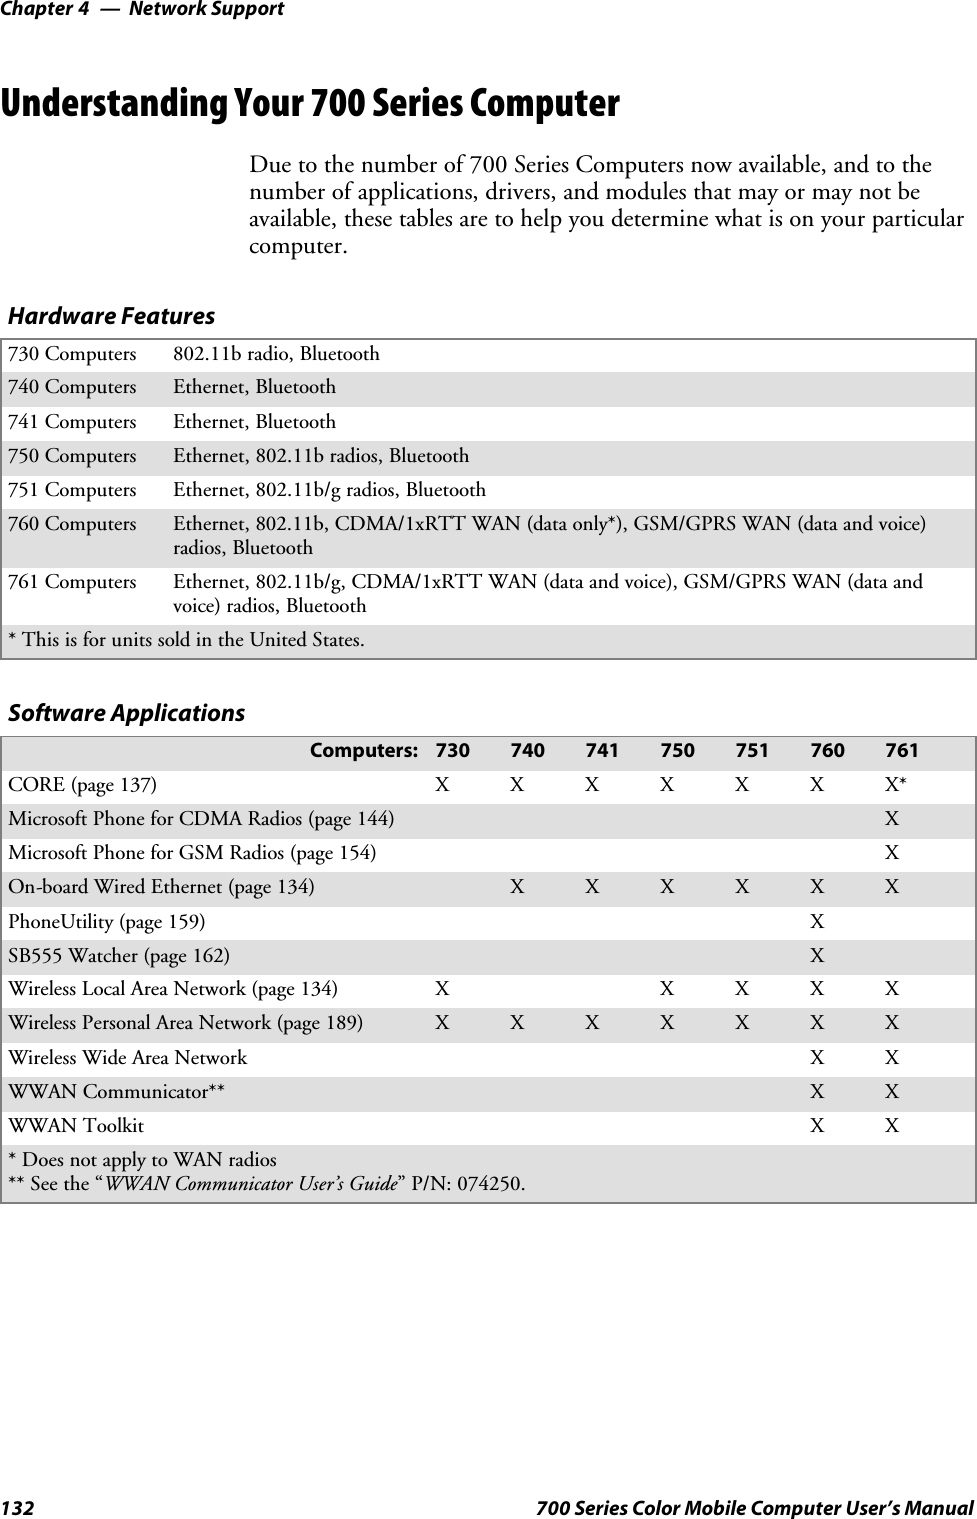 Network SupportChapter —4132 700 Series Color Mobile Computer User’s ManualUnderstanding Your 700 Series ComputerDue to the number of 700 Series Computers now available, and to thenumber of applications, drivers, and modules that may or may not beavailable, these tables are to help you determine what is on your particularcomputer.Hardware Features730 Computers 802.11b radio, Bluetooth740 Computers Ethernet, Bluetooth741 Computers Ethernet, Bluetooth750 Computers Ethernet, 802.11b radios, Bluetooth751 Computers Ethernet, 802.11b/g radios, Bluetooth760 Computers Ethernet, 802.11b, CDMA/1xRTT WAN (data only*), GSM/GPRS WAN (data and voice)radios, Bluetooth761 Computers Ethernet, 802.11b/g, CDMA/1xRTT WAN (data and voice), GSM/GPRS WAN (data andvoice) radios, Bluetooth*ThisisforunitssoldintheUnitedStates.Software ApplicationsComputers: 730 740 741 750 751 760 761CORE (page 137) XXXXXXX*Microsoft Phone for CDMA Radios (page 144) XMicrosoft Phone for GSM Radios (page 154) XOn-board Wired Ethernet (page 134) XXXXXXPhoneUtility (page 159) XSB555 Watcher (page 162) XWireless Local Area Network (page 134) X XXXXWireless Personal Area Network (page 189) XXXXXXXWireless Wide Area Network XXWWAN Communicator** X XWWAN Toolkit XX* Does not apply to WAN radios** See the “WWAN Communicator User’s Guide” P/N: 074250.